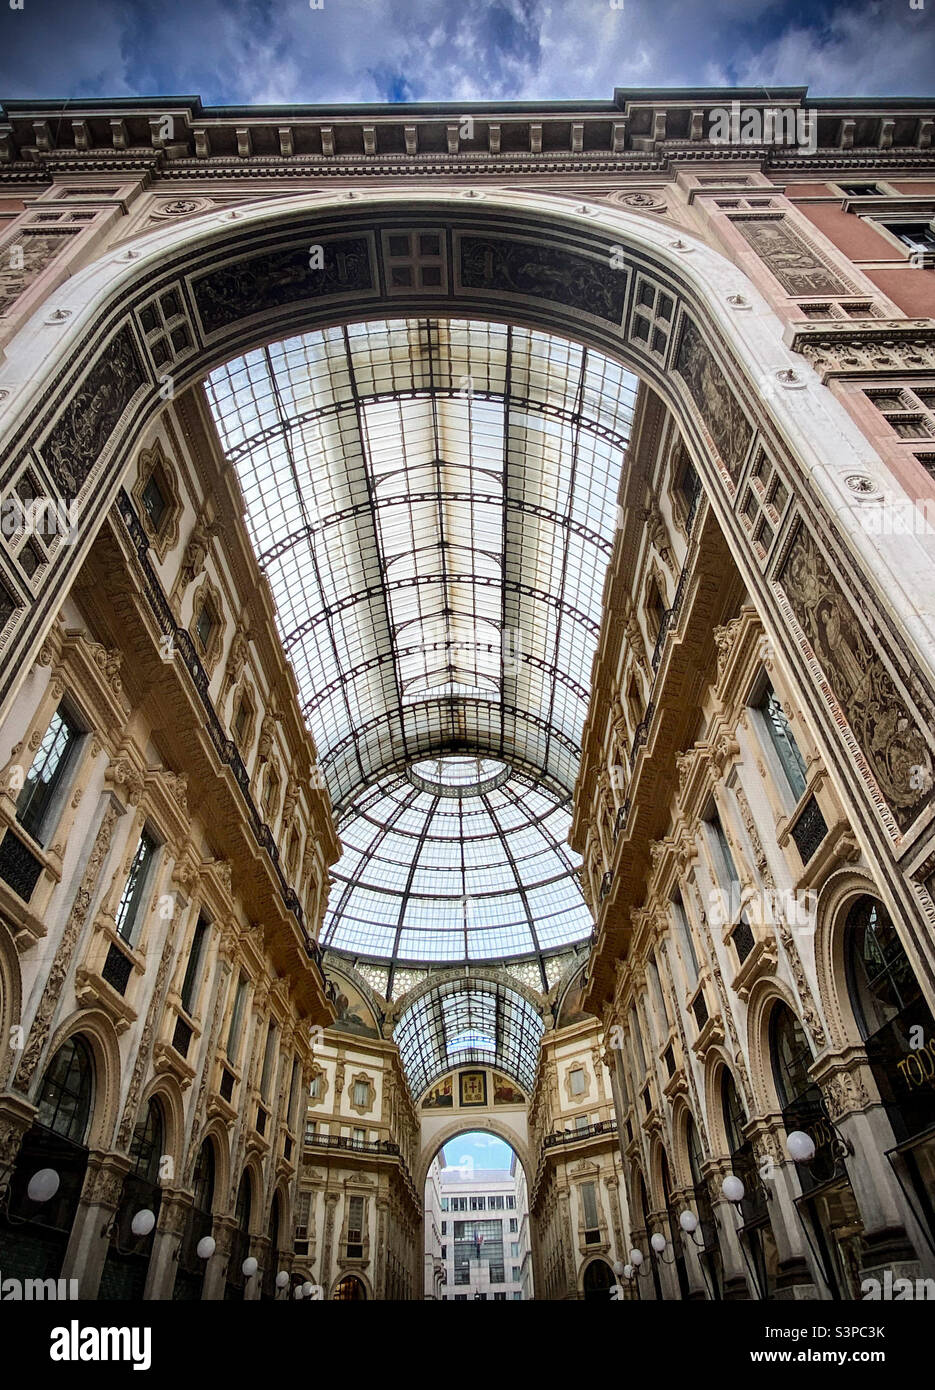 The entry to the glass and wrought iron arcade of the famed Galleria Victorio Emanuele II in central Milan, Italy Stock Photo